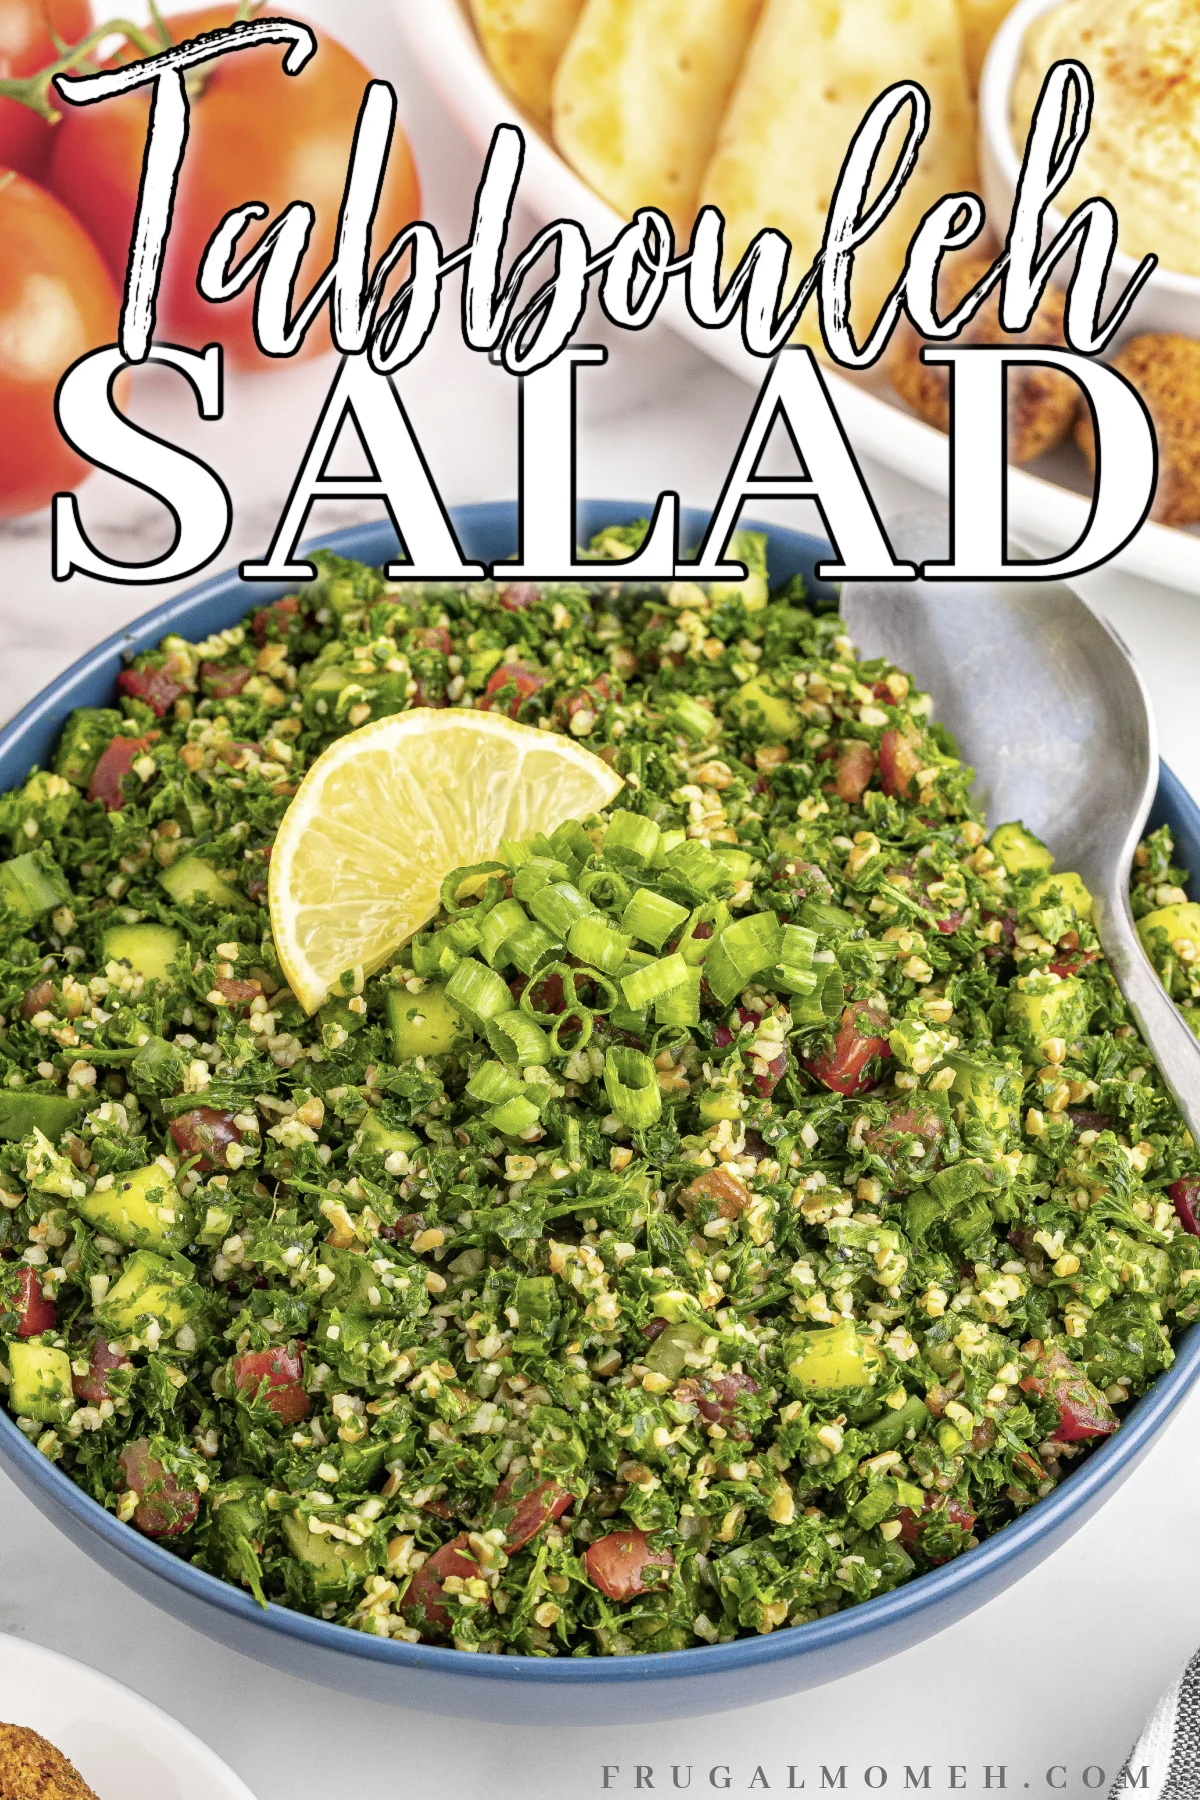 Get ready to whip up a fresh and delicious Mediterranean favourite with this step-by-step guide on how to make the perfect tabbouleh salad.